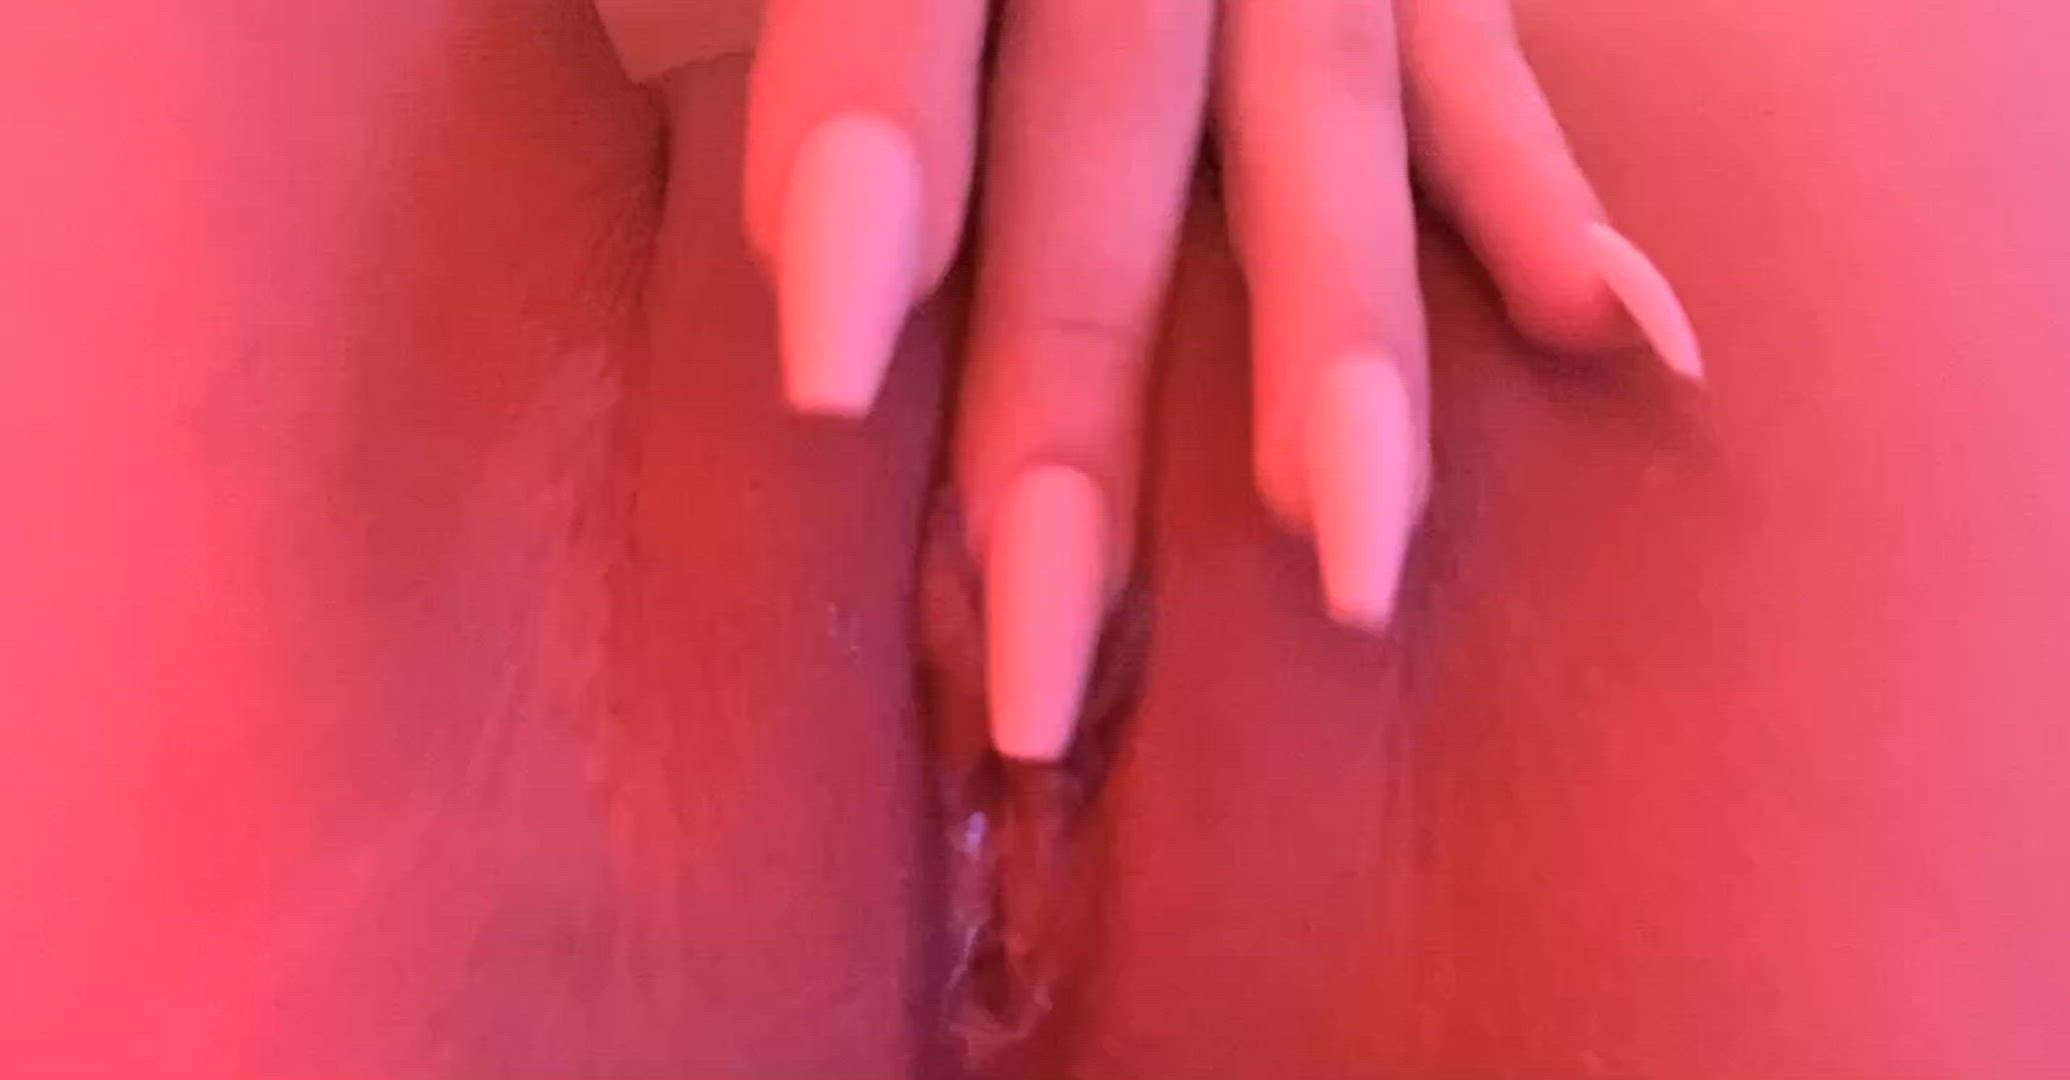 Pussy porn video with onlyfans model queenlex <strong>@queen.lex</strong>